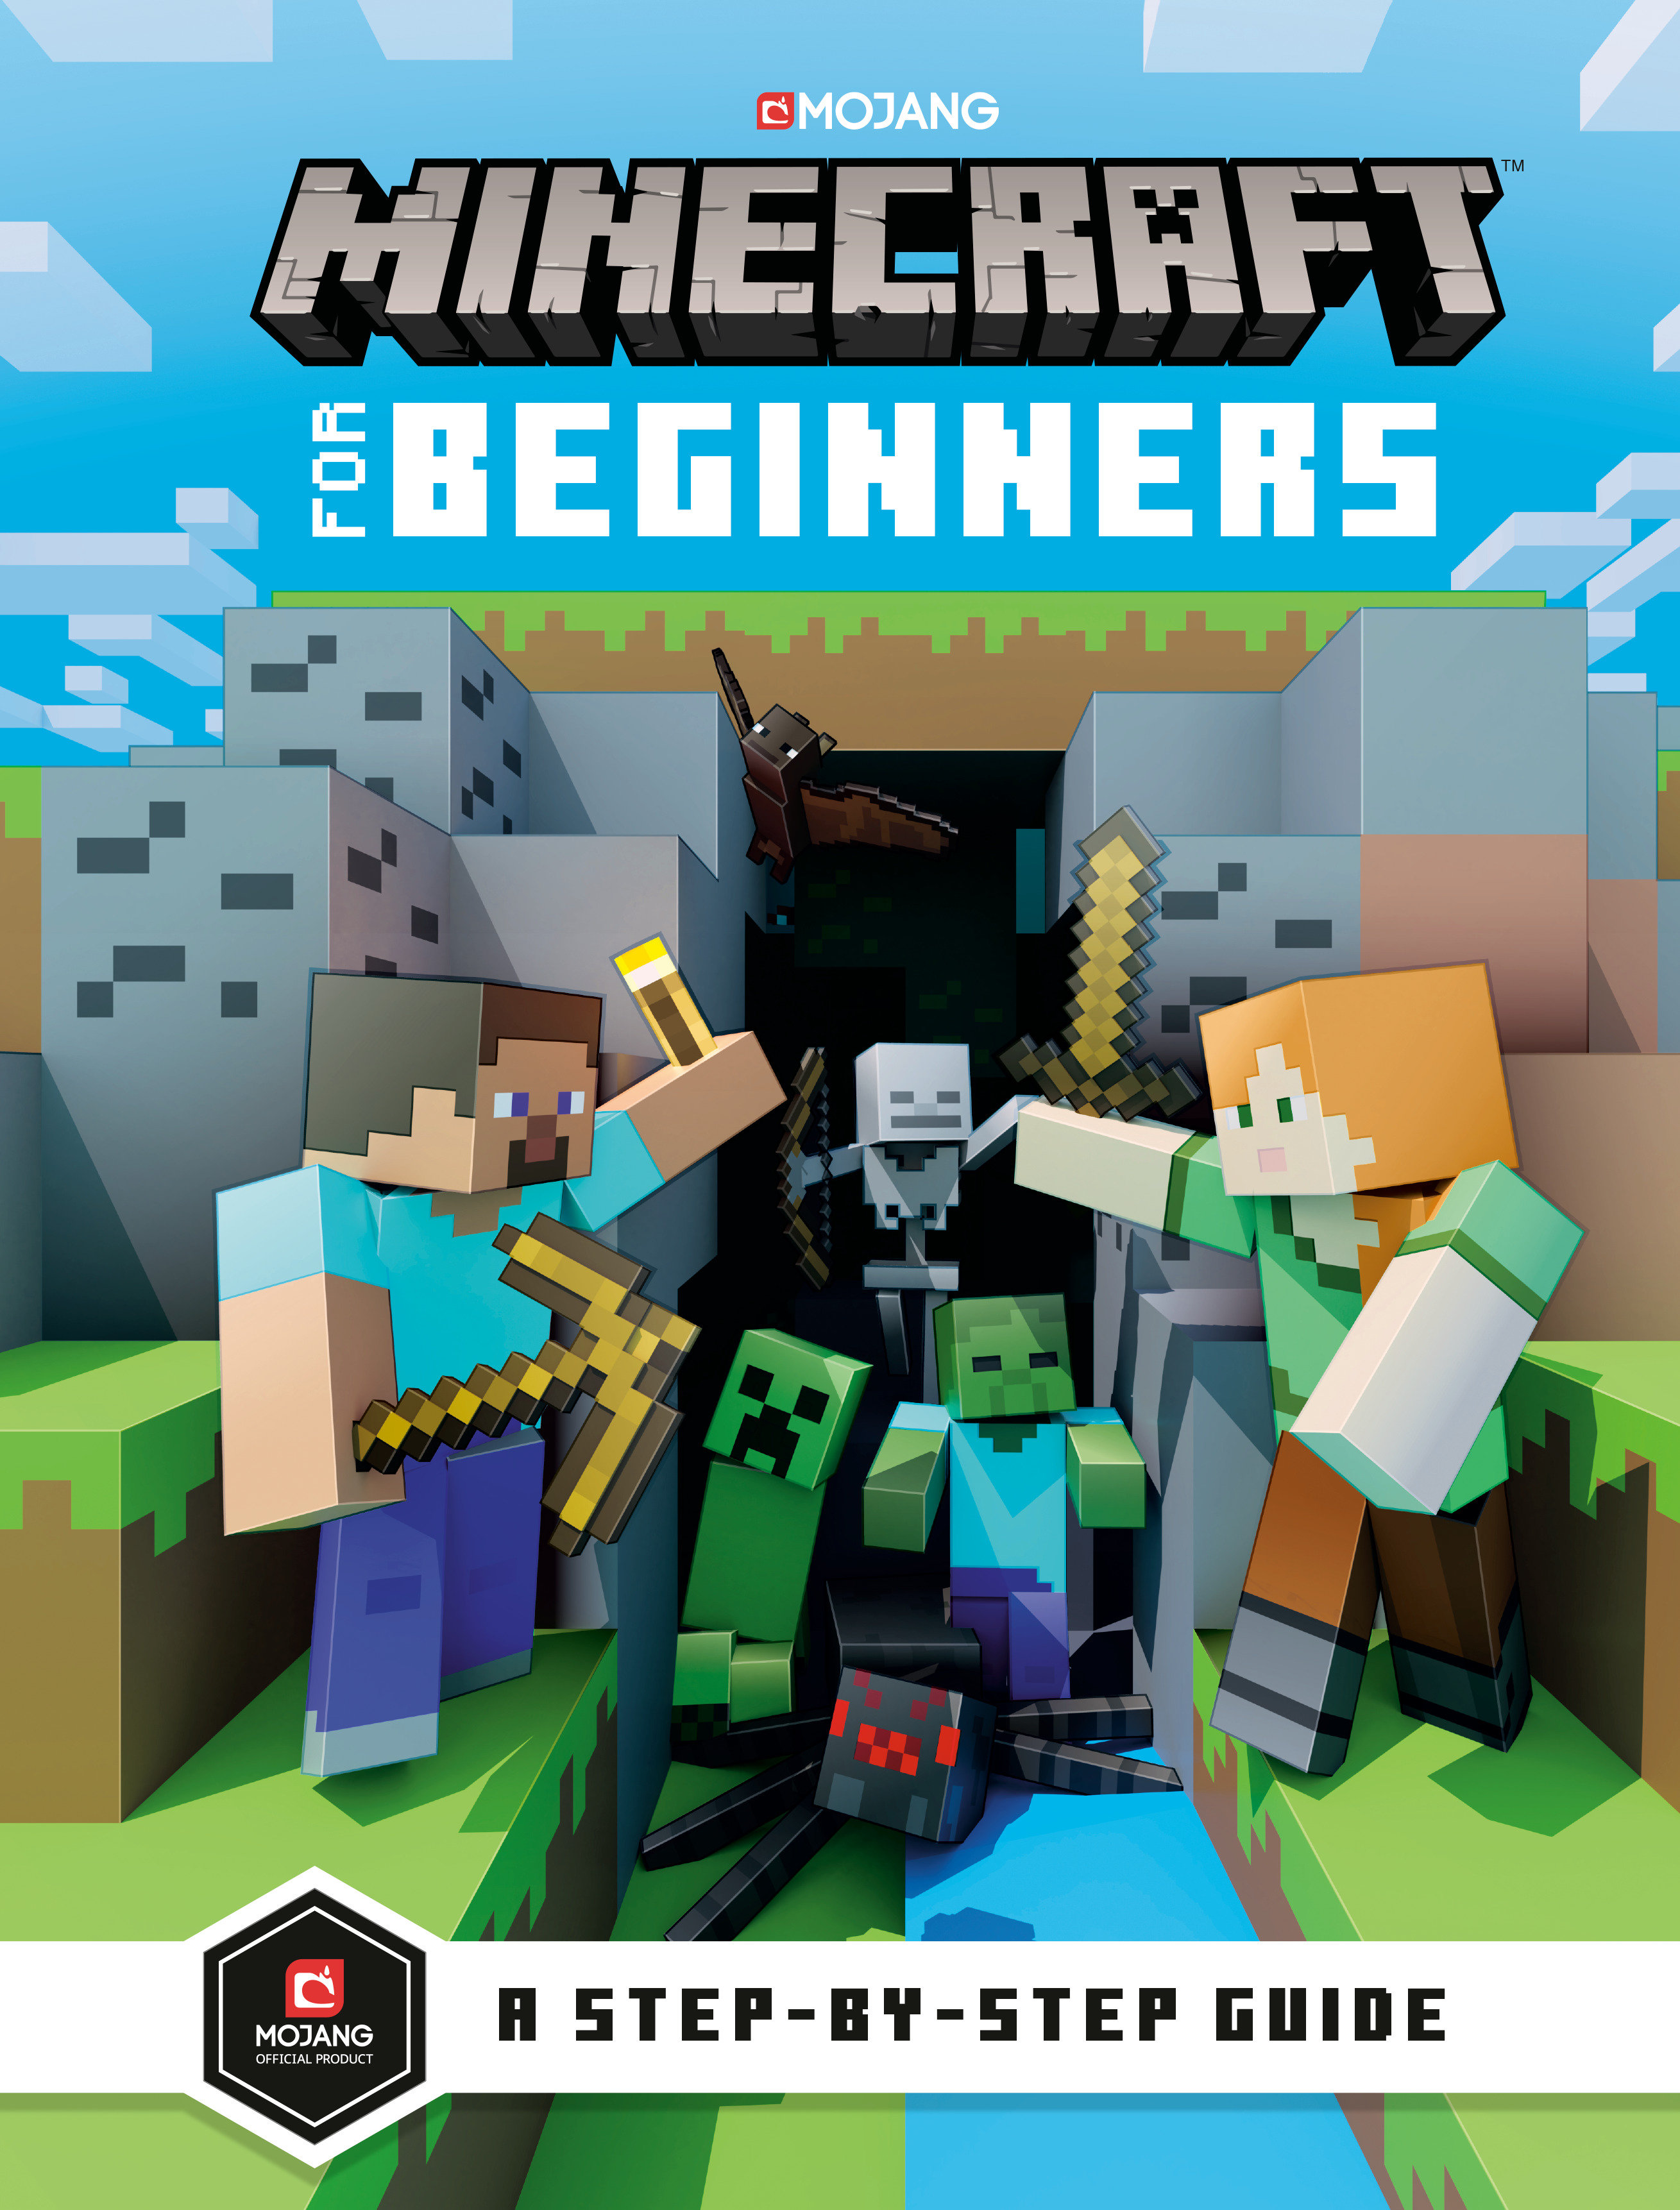 Minecraft For Beginners Hardcover